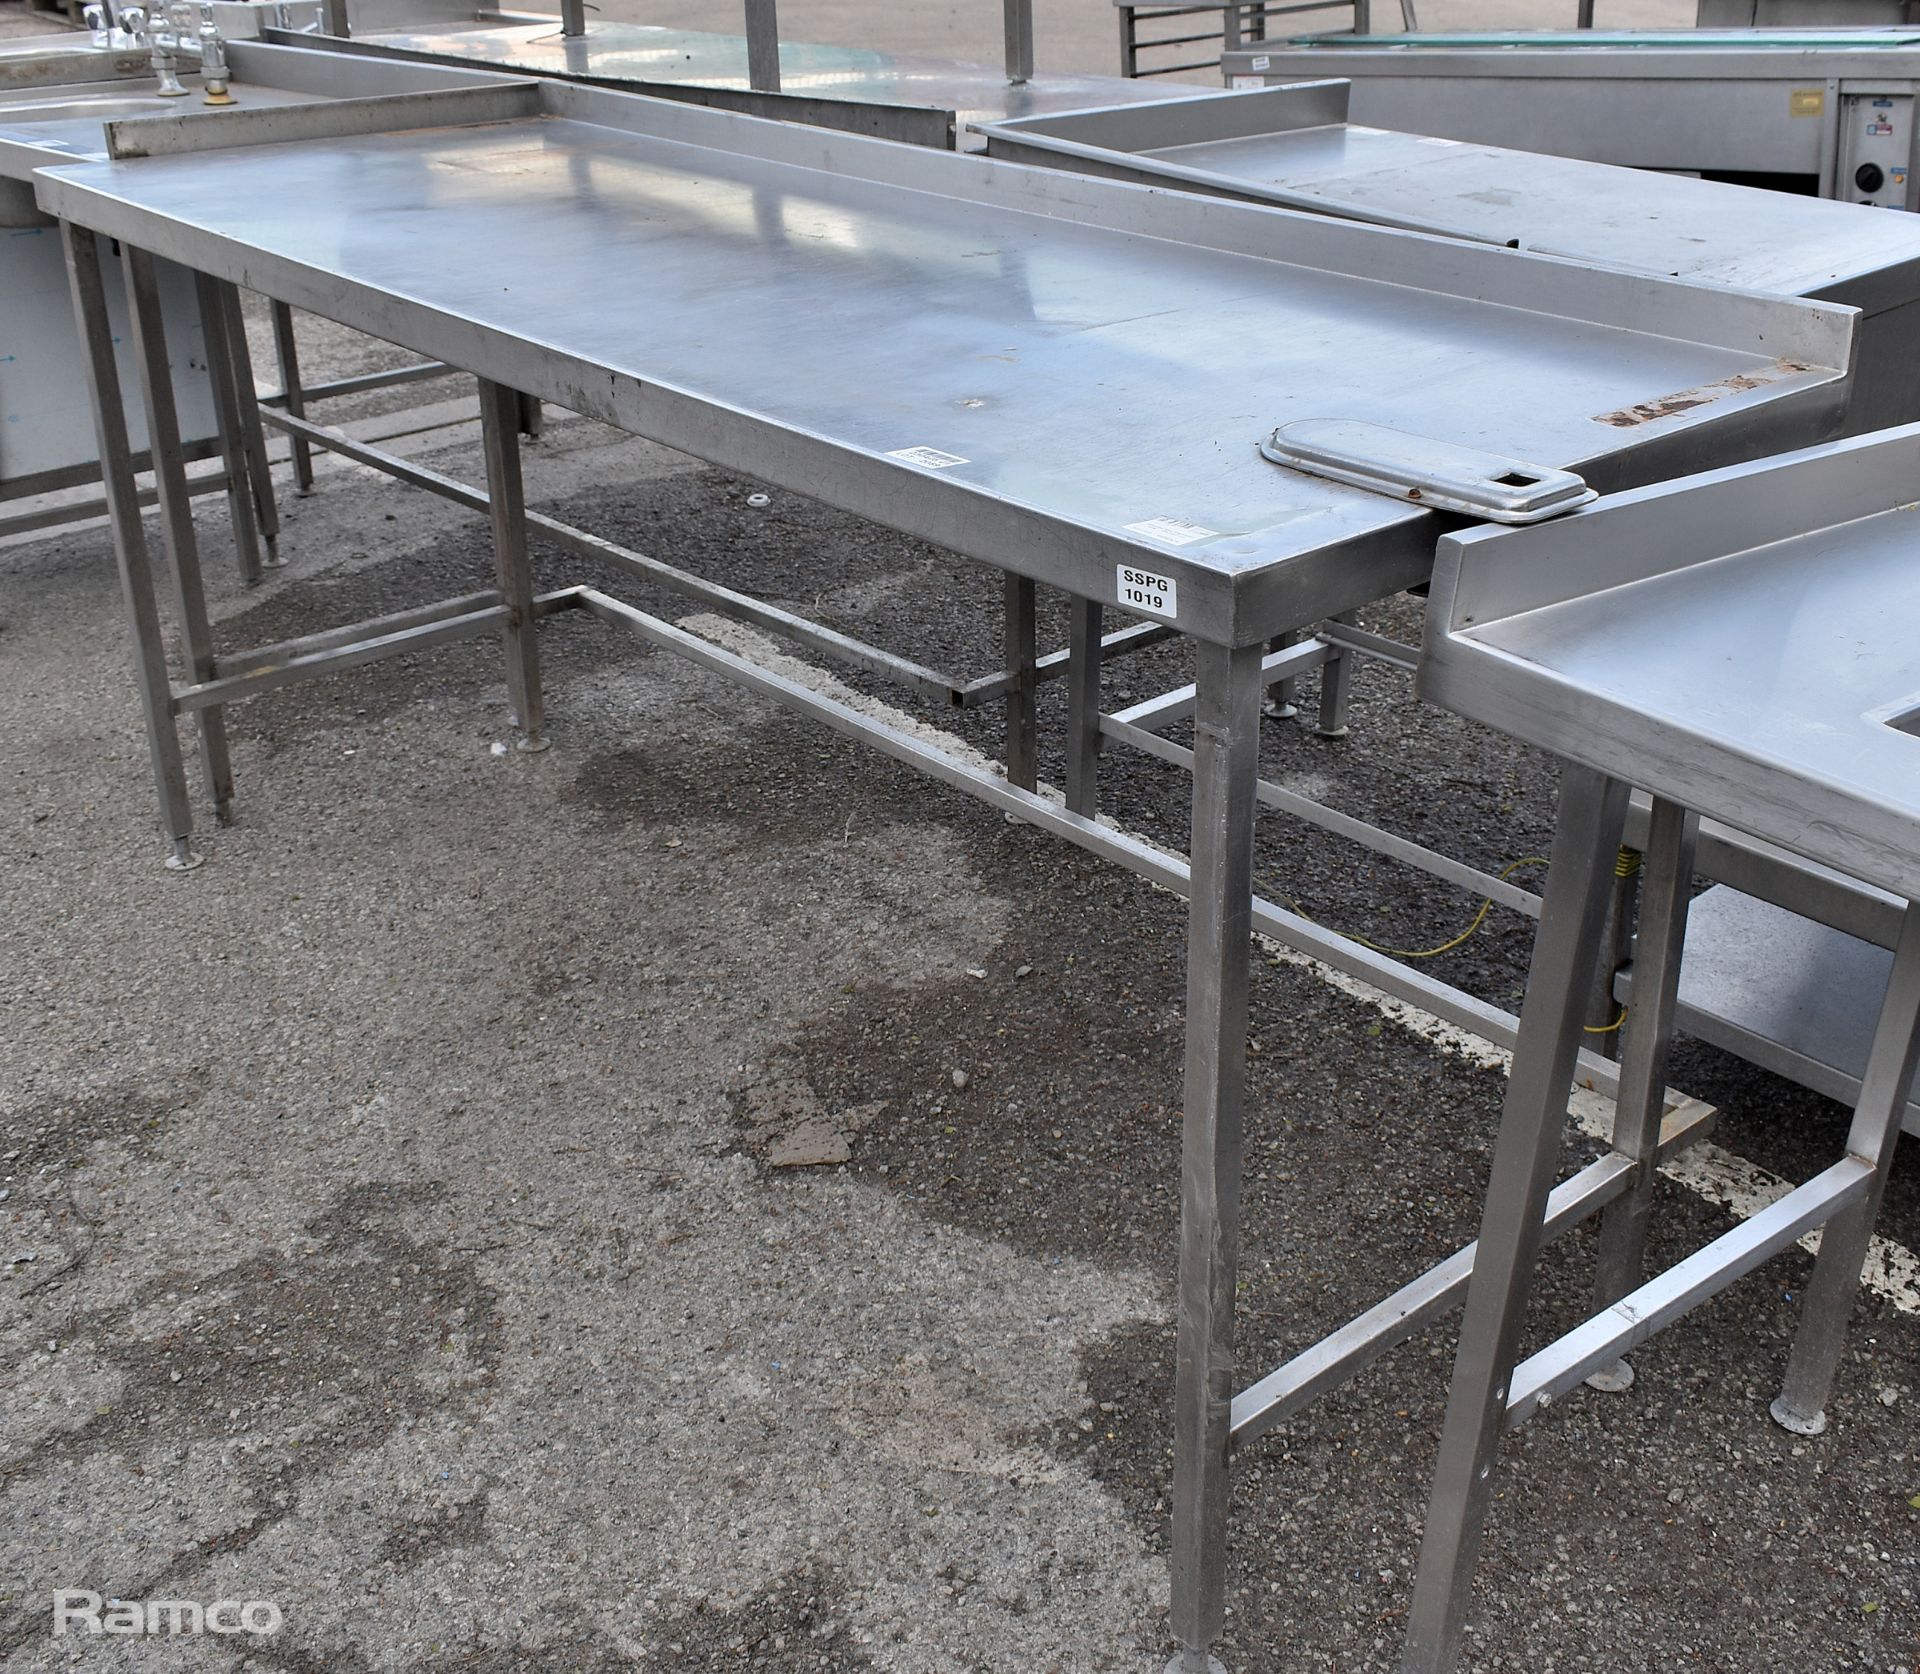 Stainless steel preparation table - 196 x 73 x 97cm - Image 2 of 4